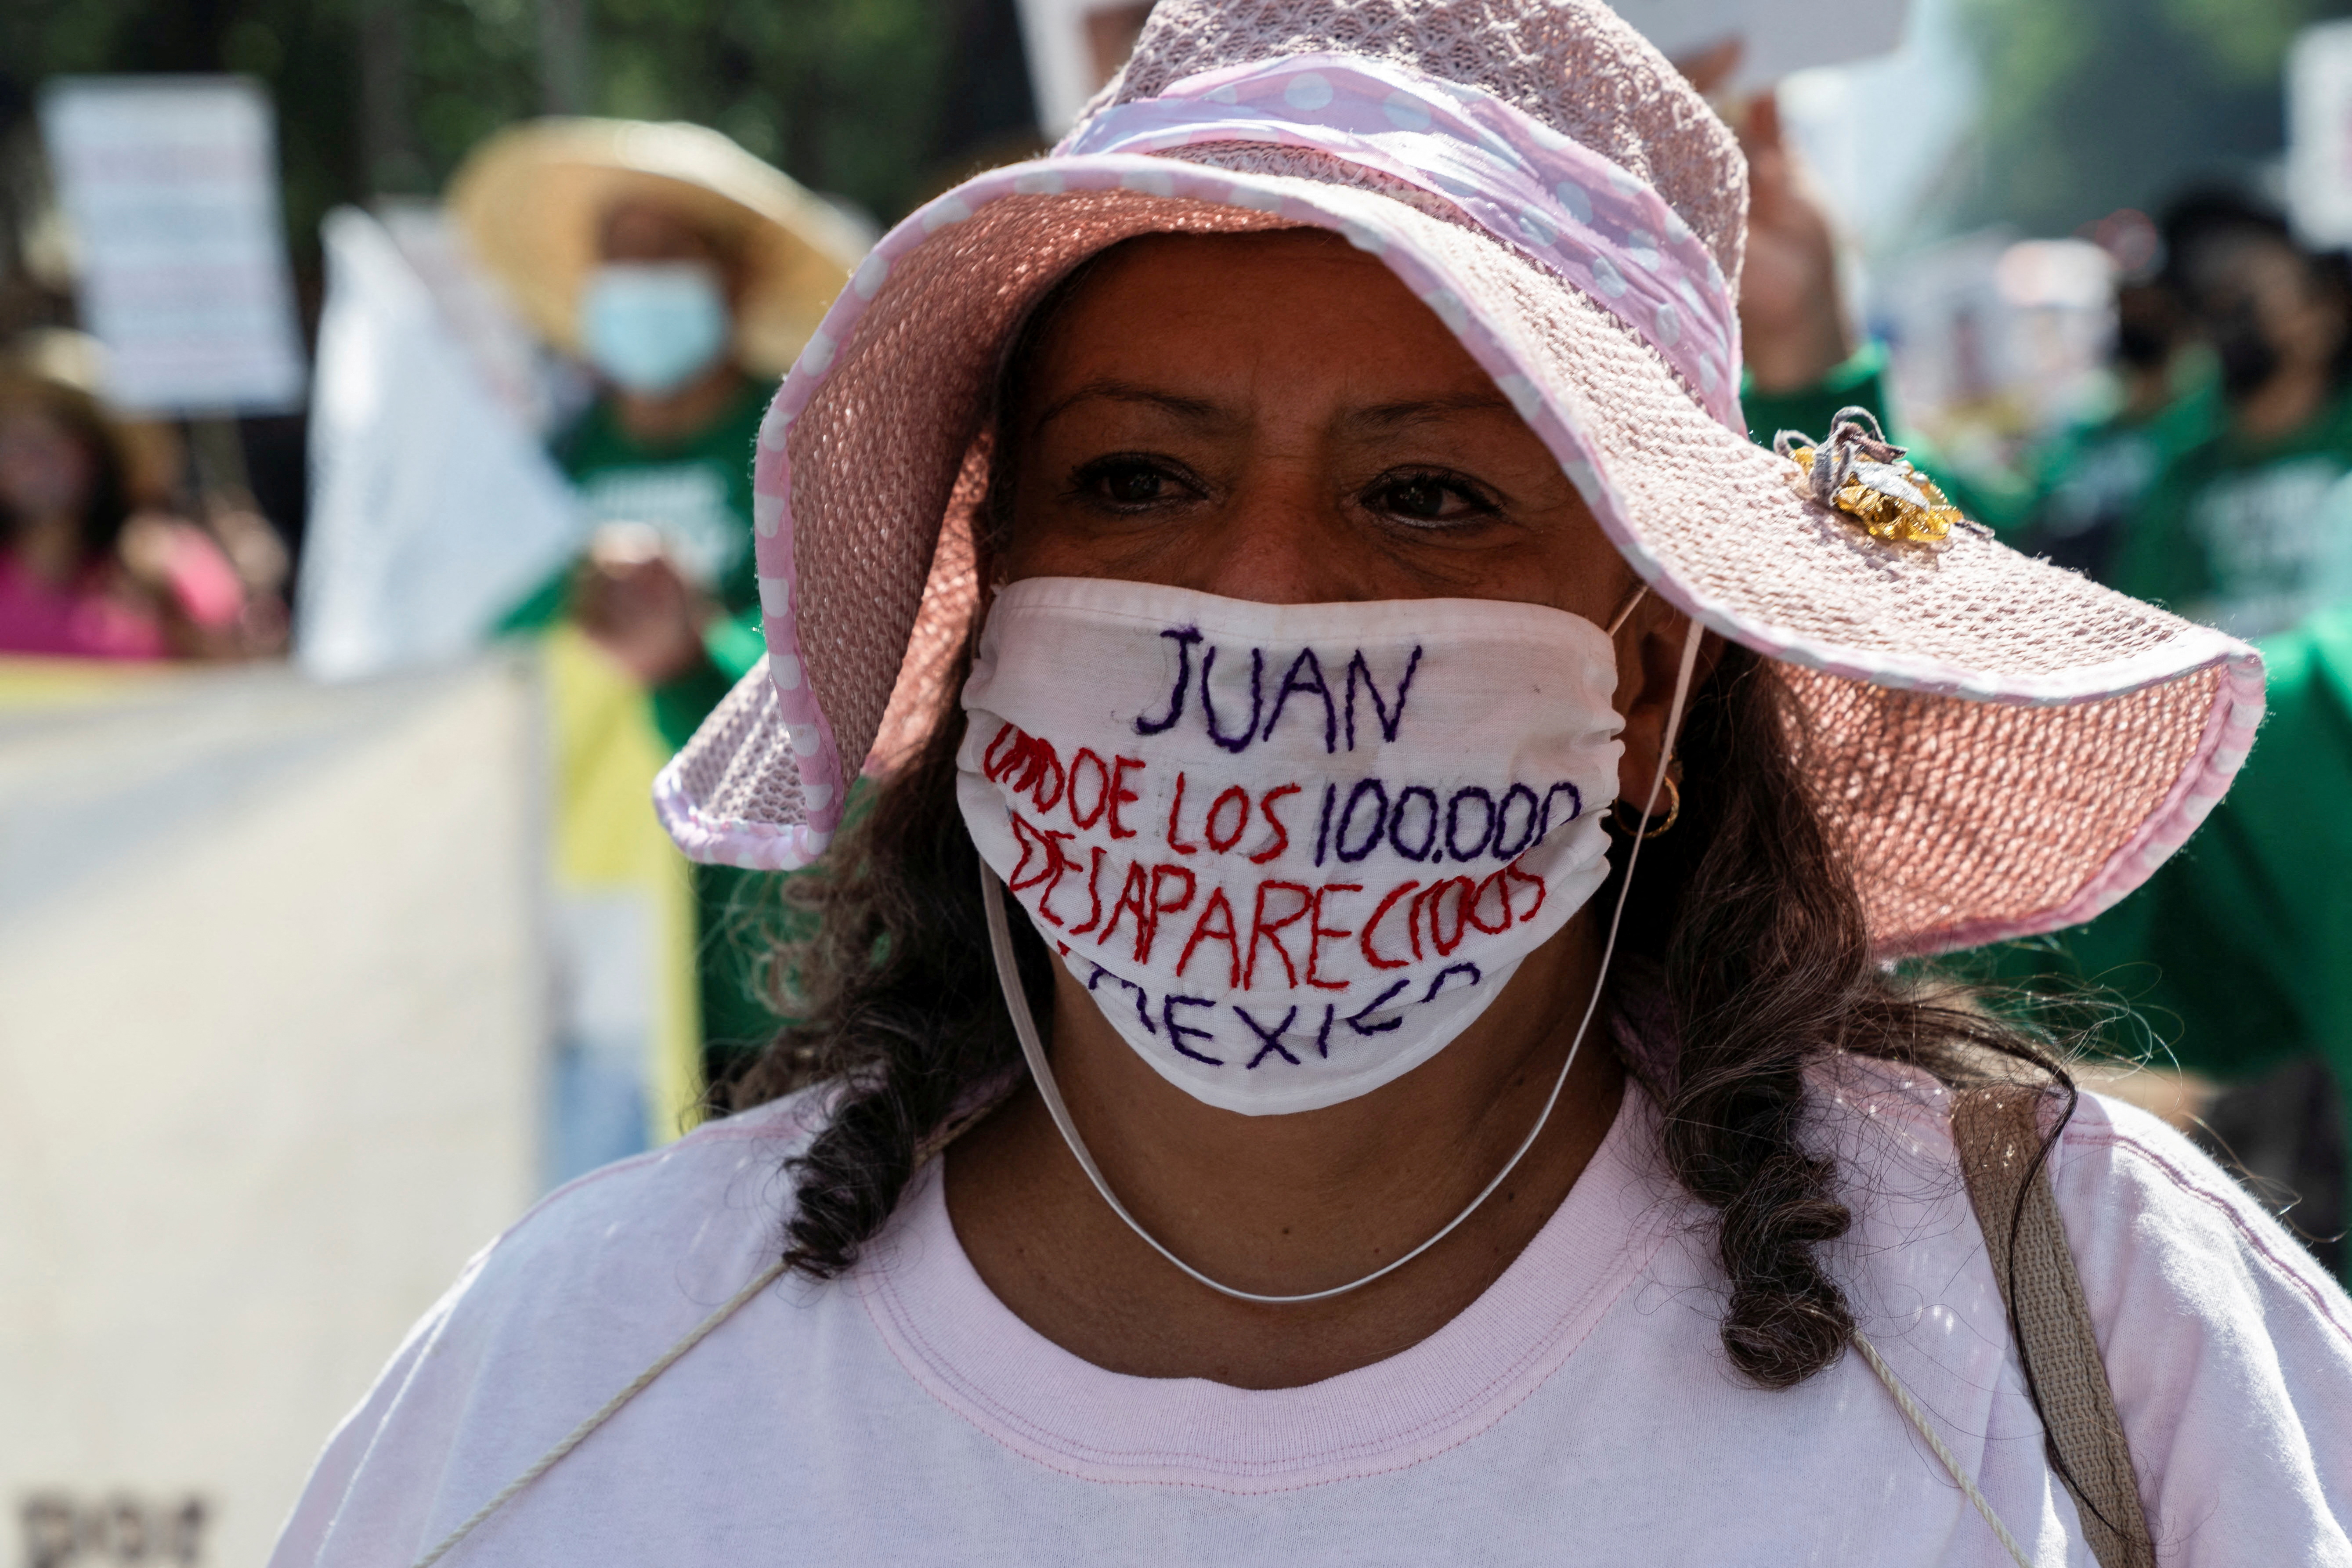 Families of disappeared people take part in a protest demanding truth and justice for victims on Mother’s Day in Mexico City